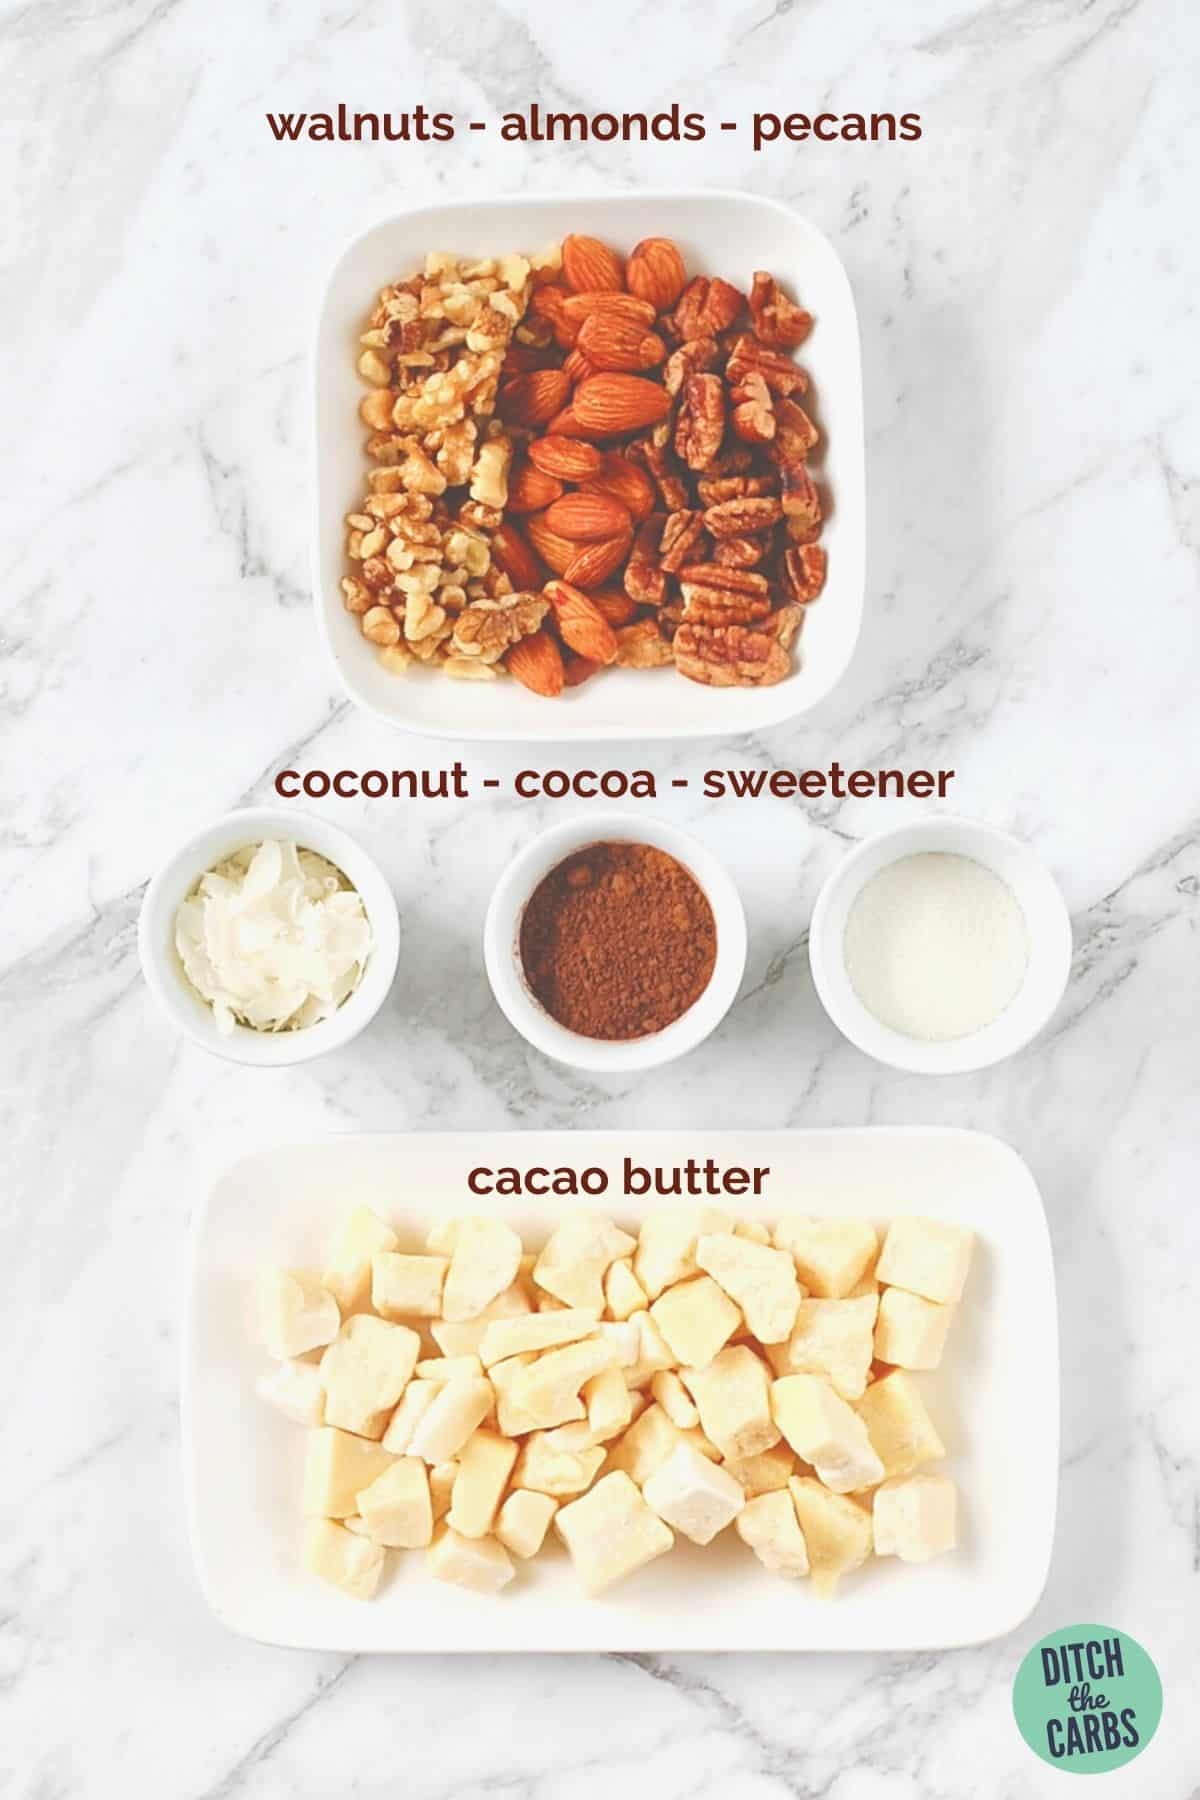 labelled ingredients to make homemade dairy-free chocolate